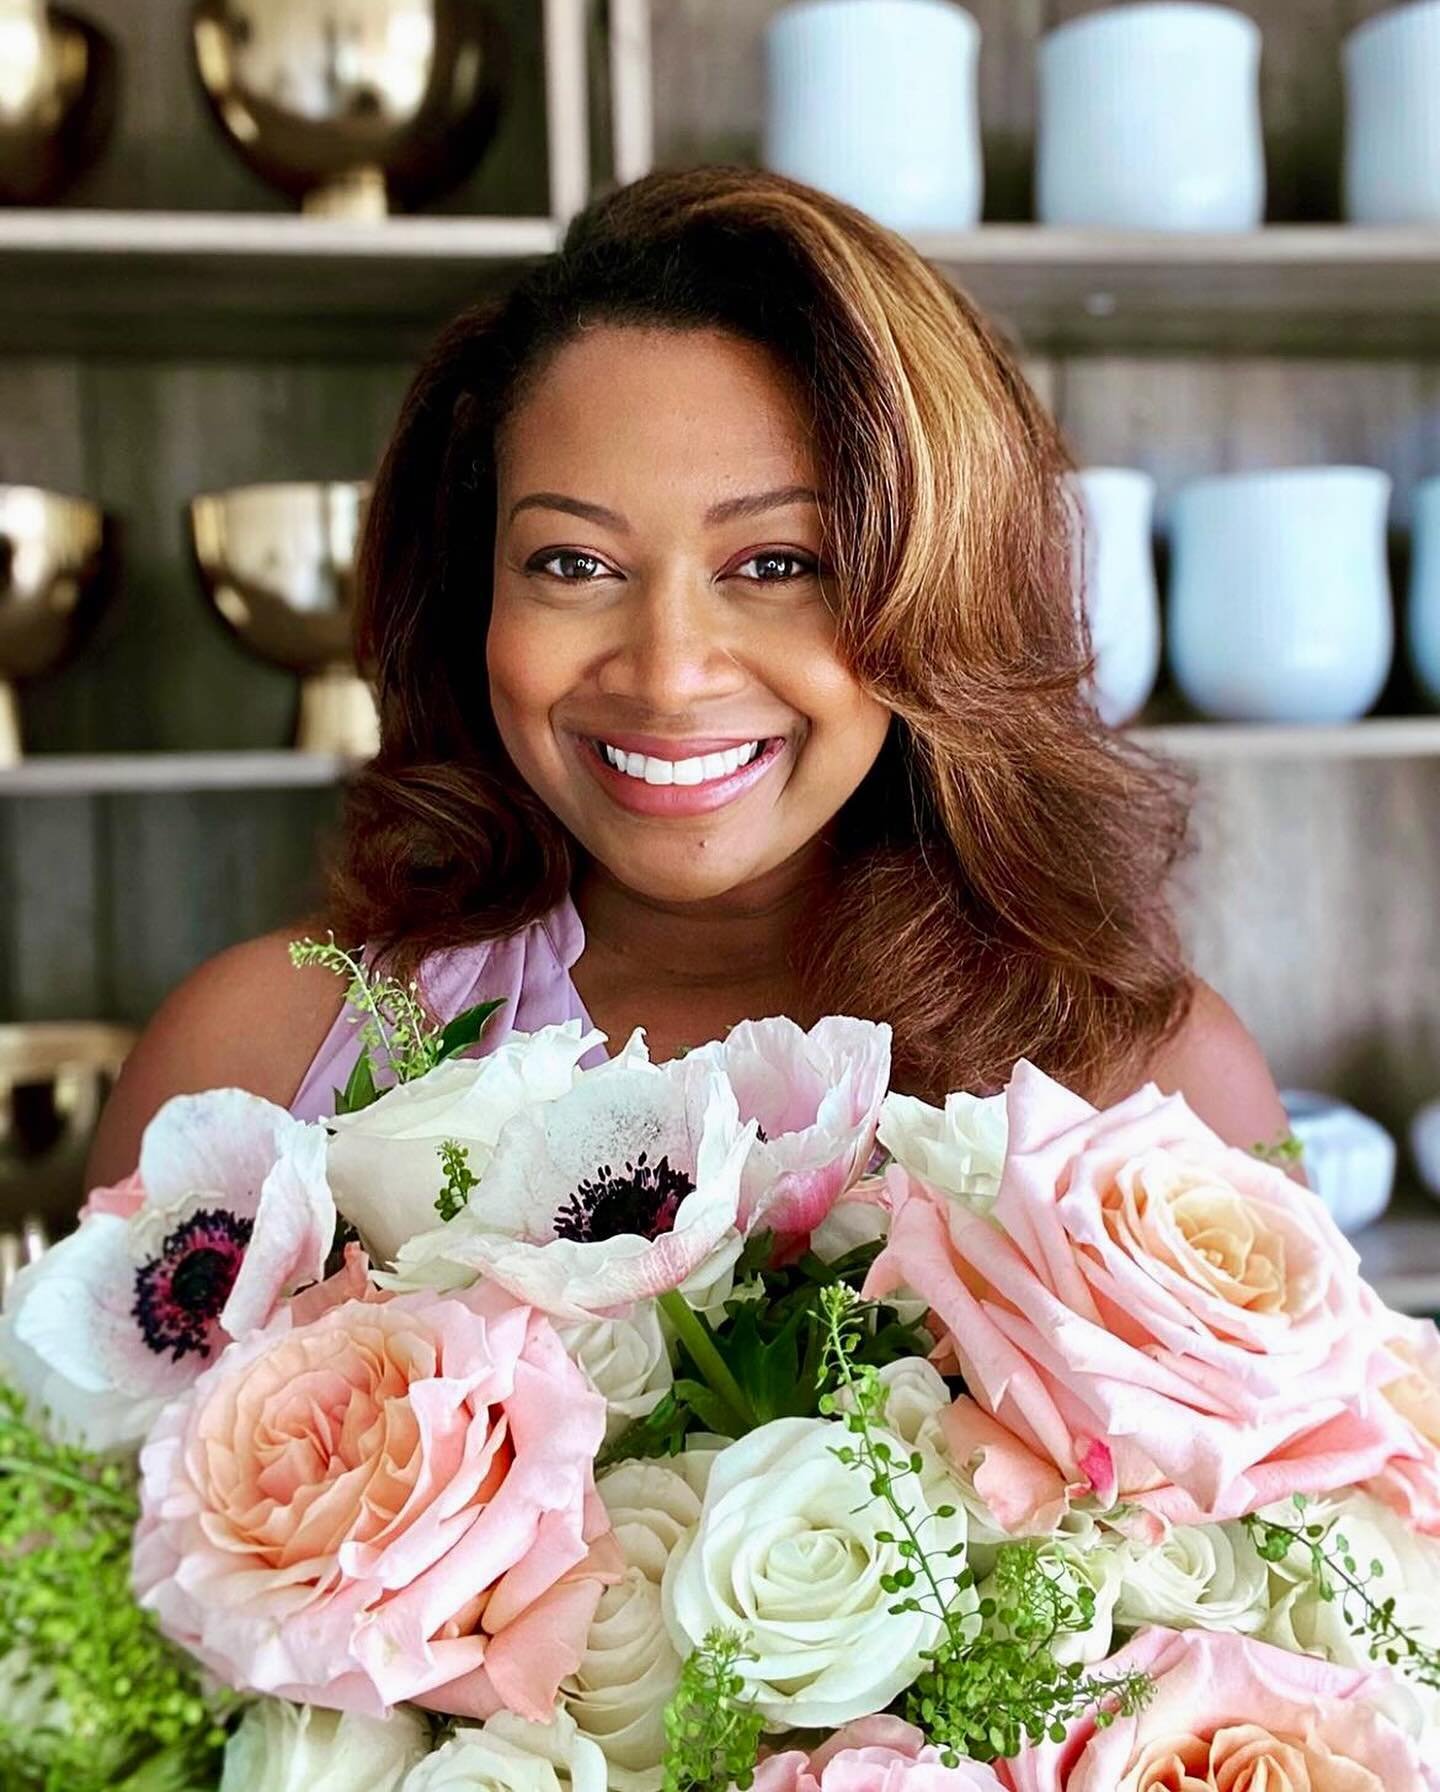 And some times we are as versatile as the pieces we design. Meet Candace 👋🏾 

Sis, is a Houston-based florist who strives to evoke emotion through her designs. Sometimes it&rsquo;s all white elegance and other times it&rsquo;s eclectic artistry in 